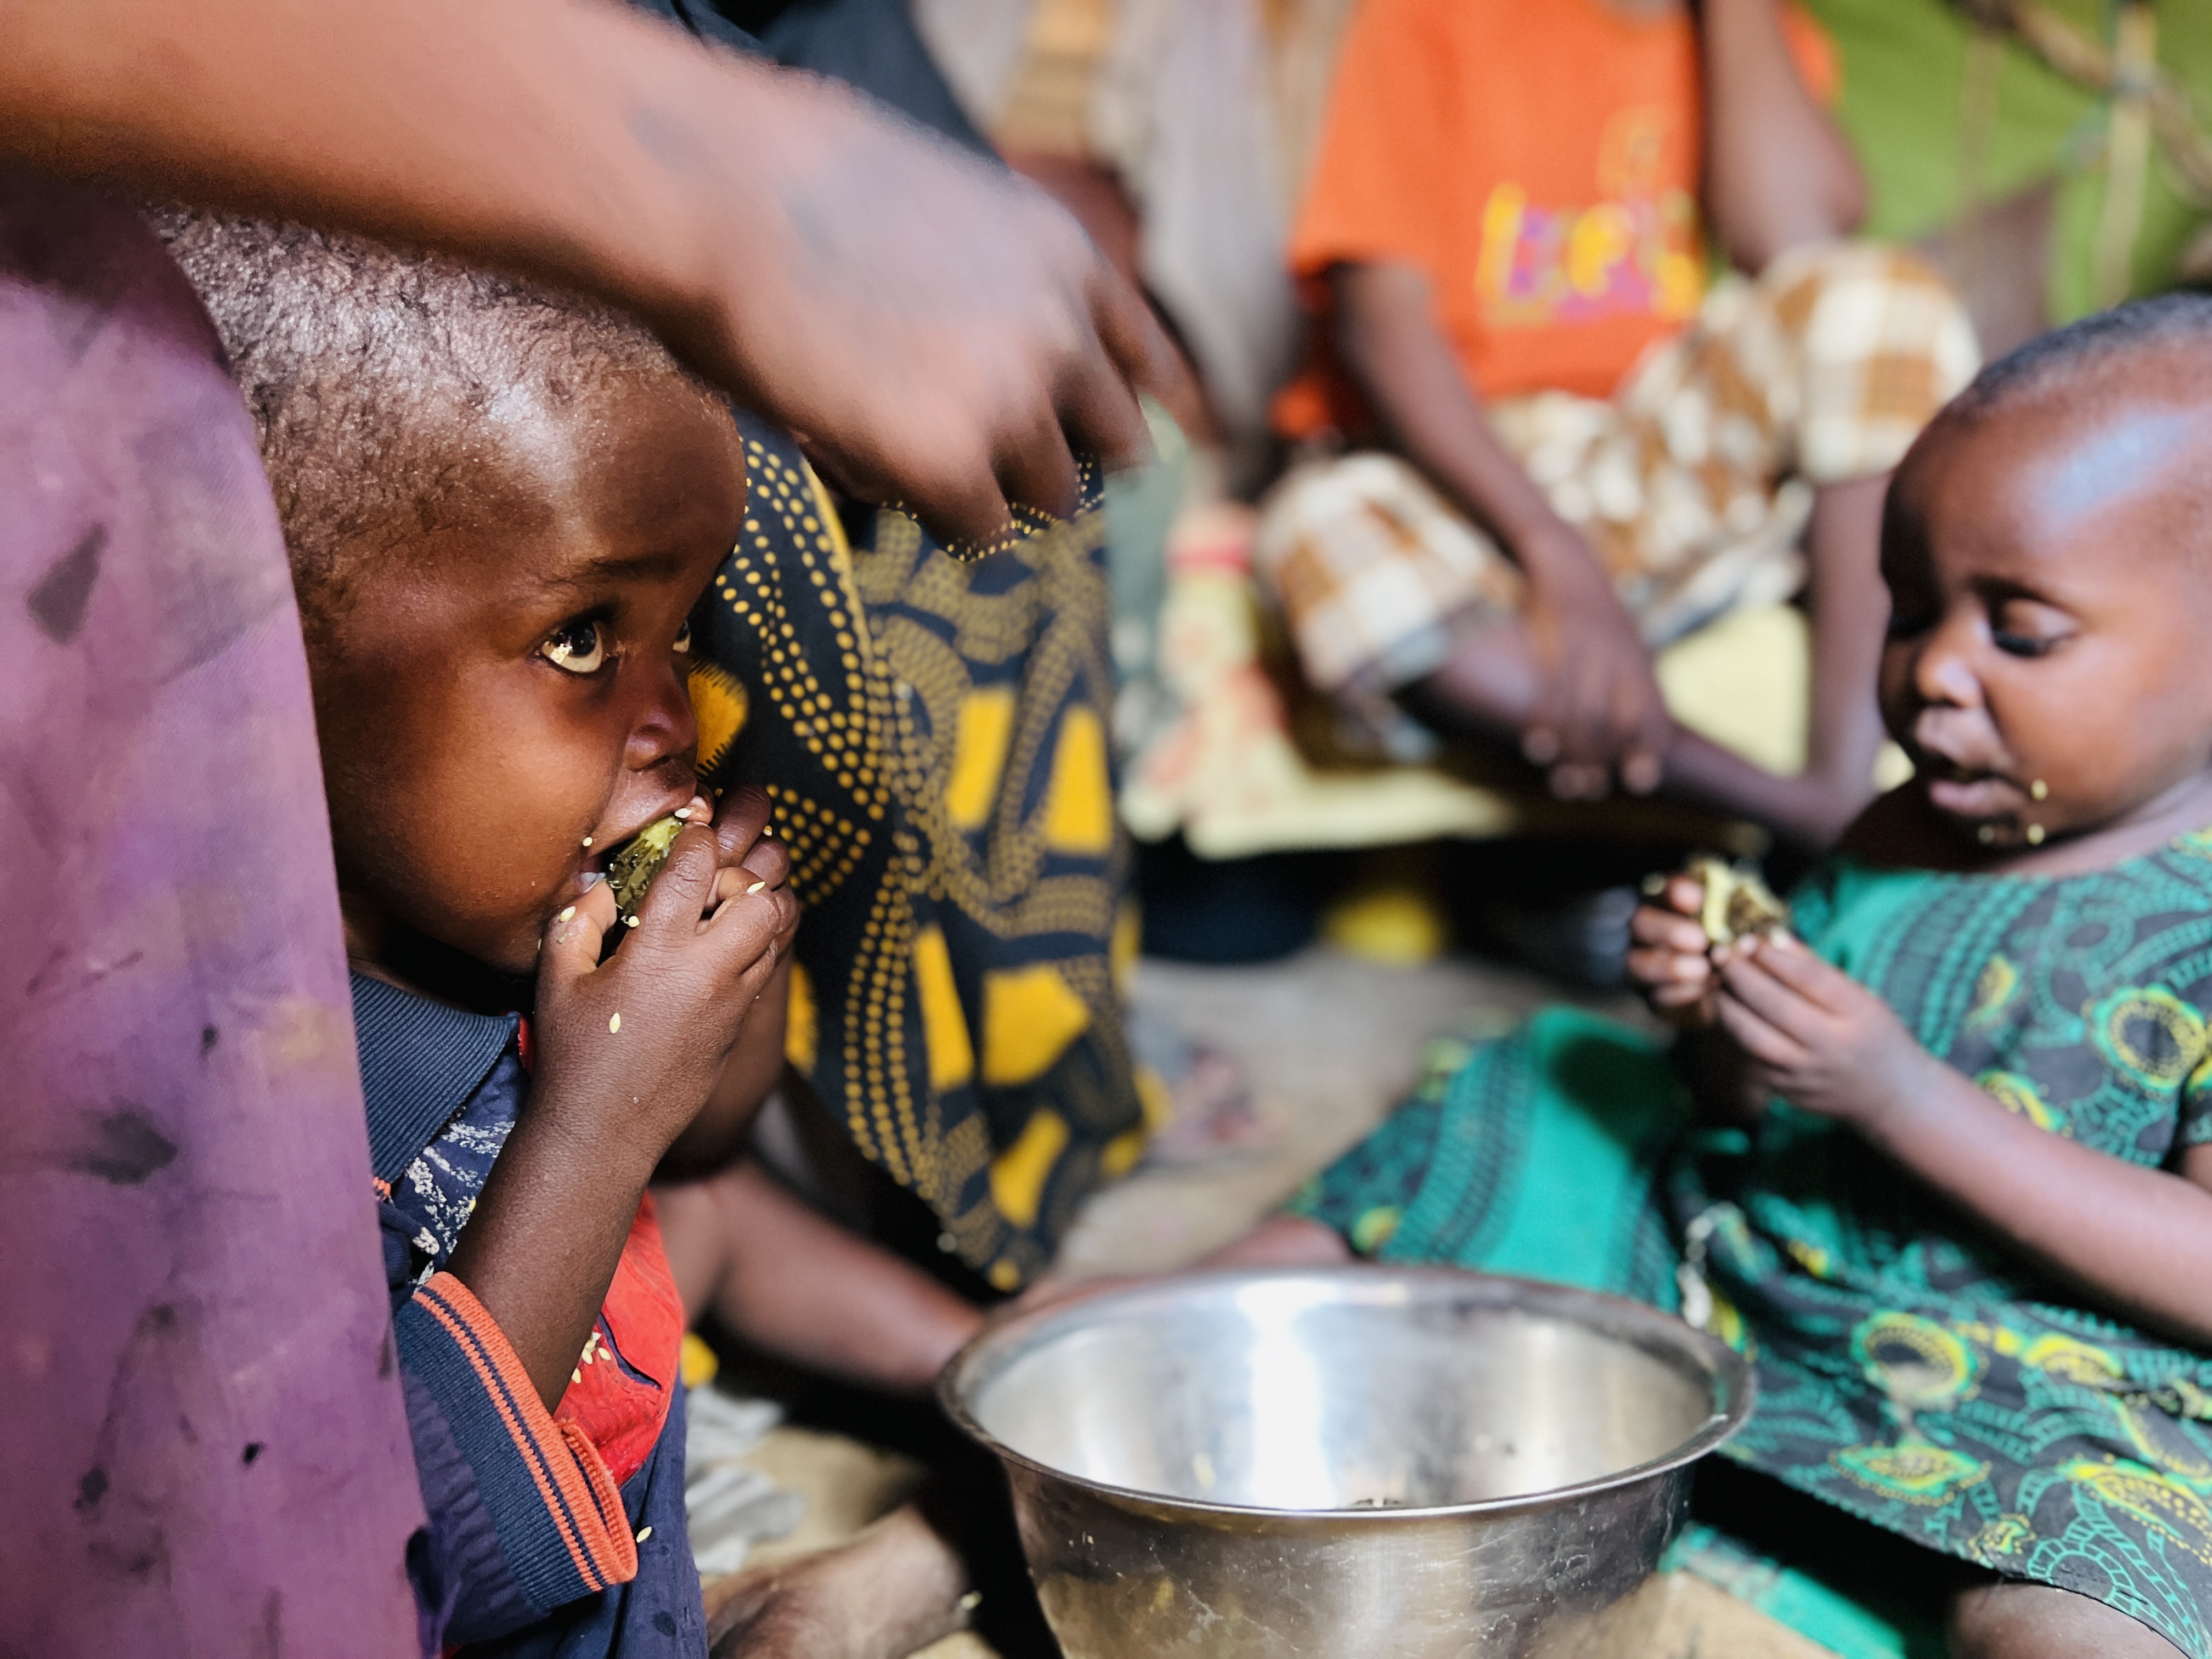 When food options run out, Hawa feeds her children boiled wild fruits. Her 3-year-old son has also experienced stunted growth and is always complaining of hunger.